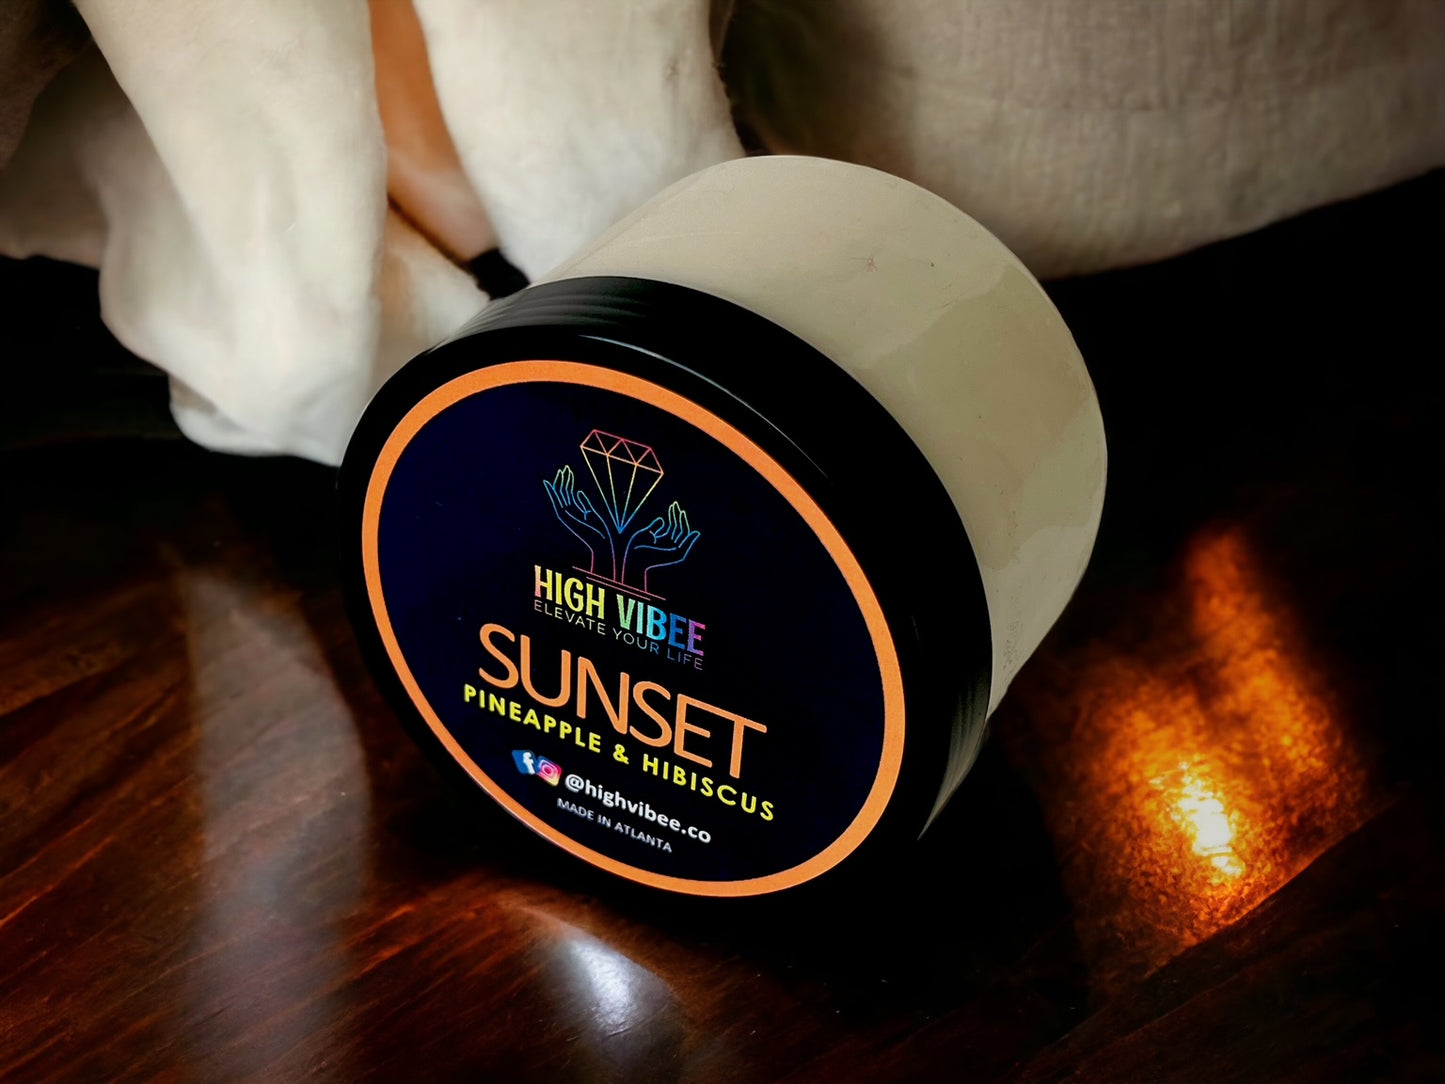 In this photo, there is a jar of High Vibee's “Sunset” Body Butta scented with Pineapple & Hibiscus.